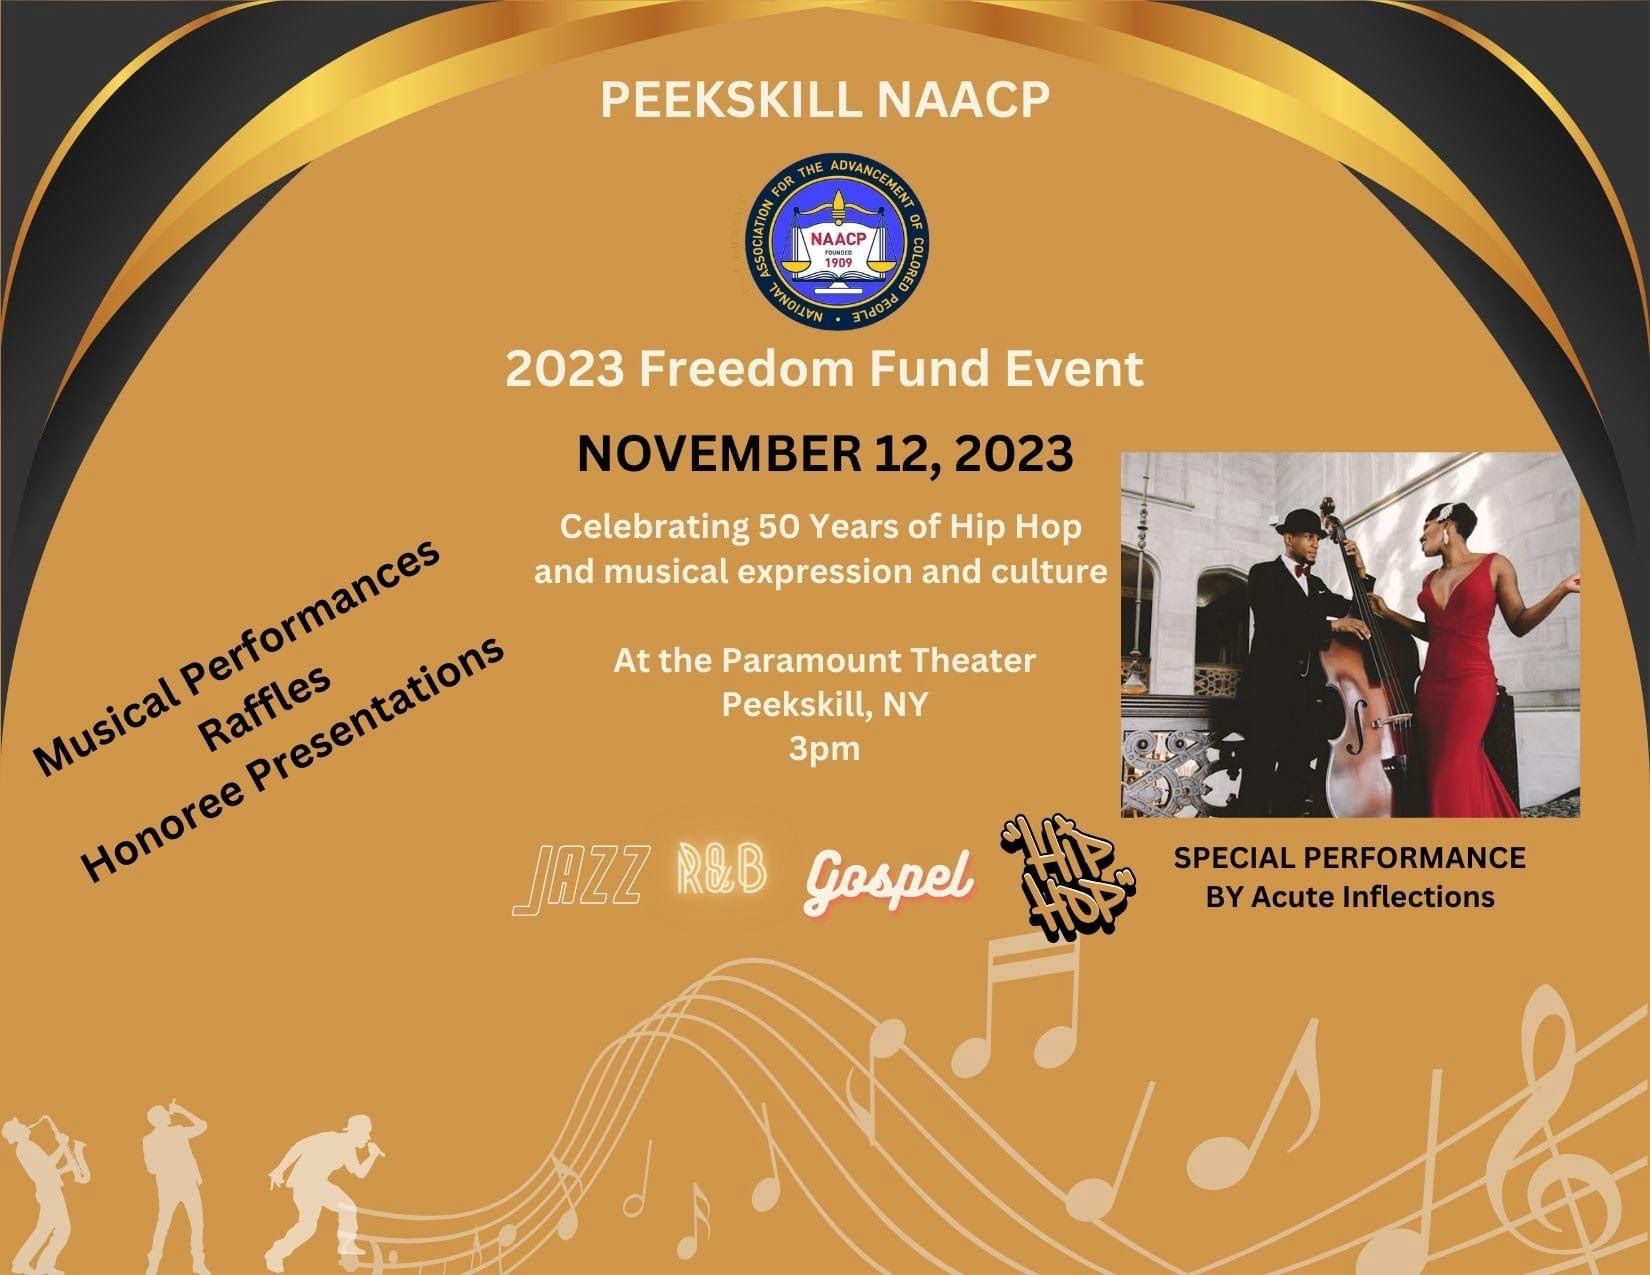 Flier for Peekskill NAACP 2023 Freedom Fund Event